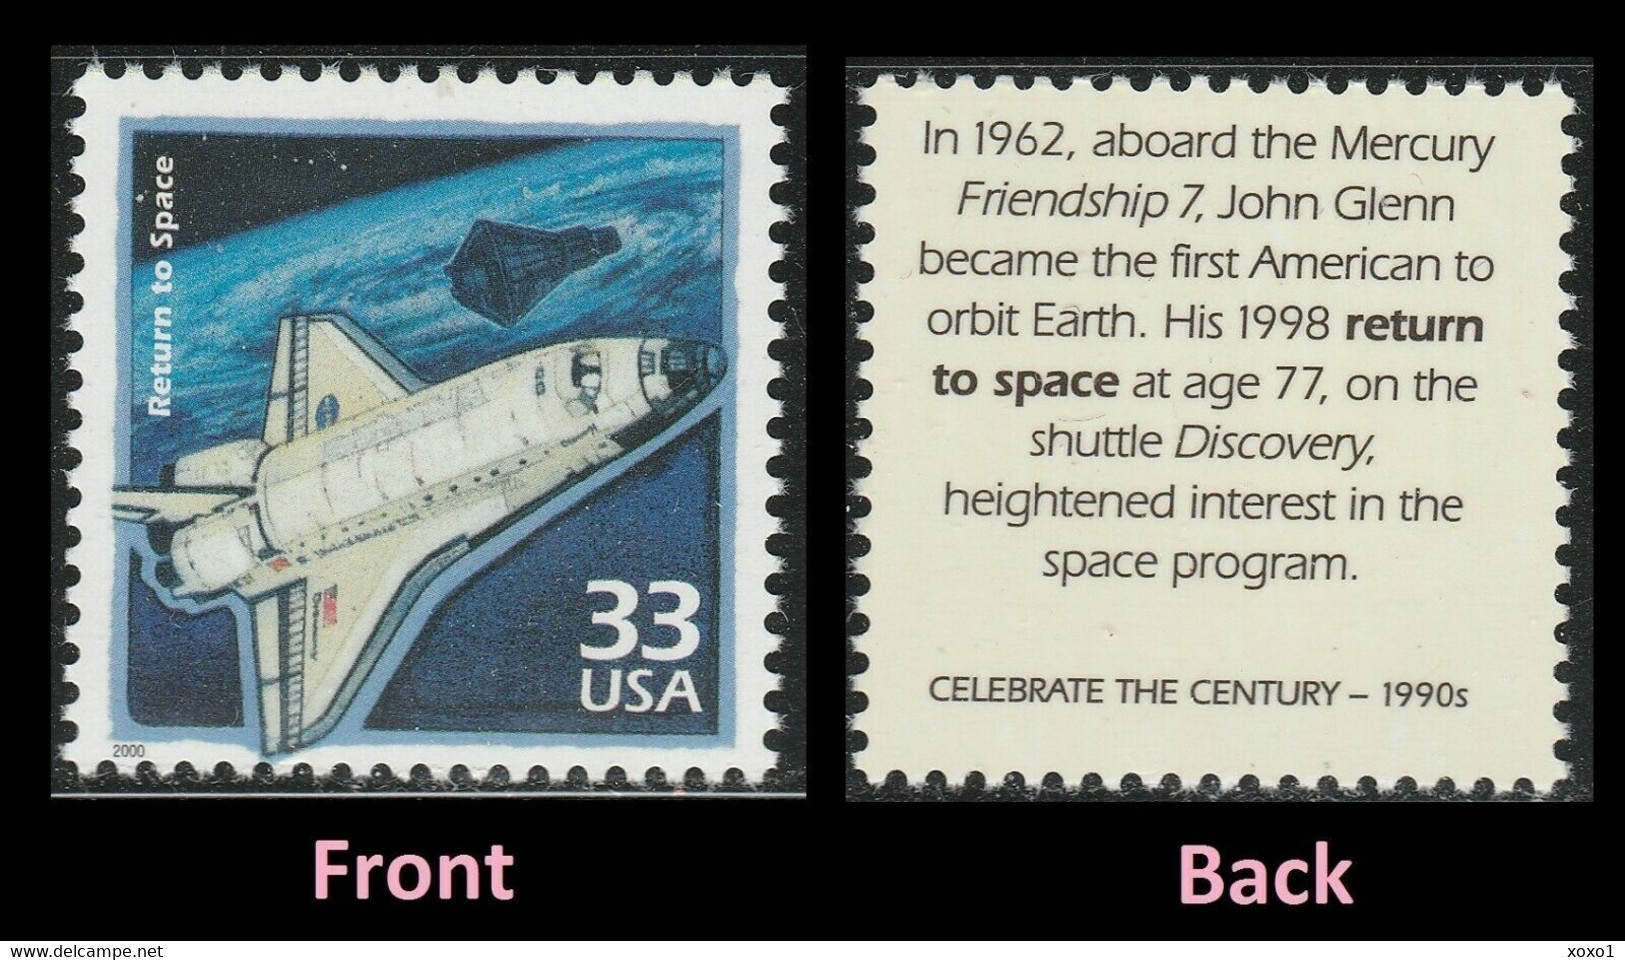 USA 2000 MiNr. 3295 Celebrate The Century 1990s Space Shuttle "Discovery" 1v MNH ** 0,80 € - North  America